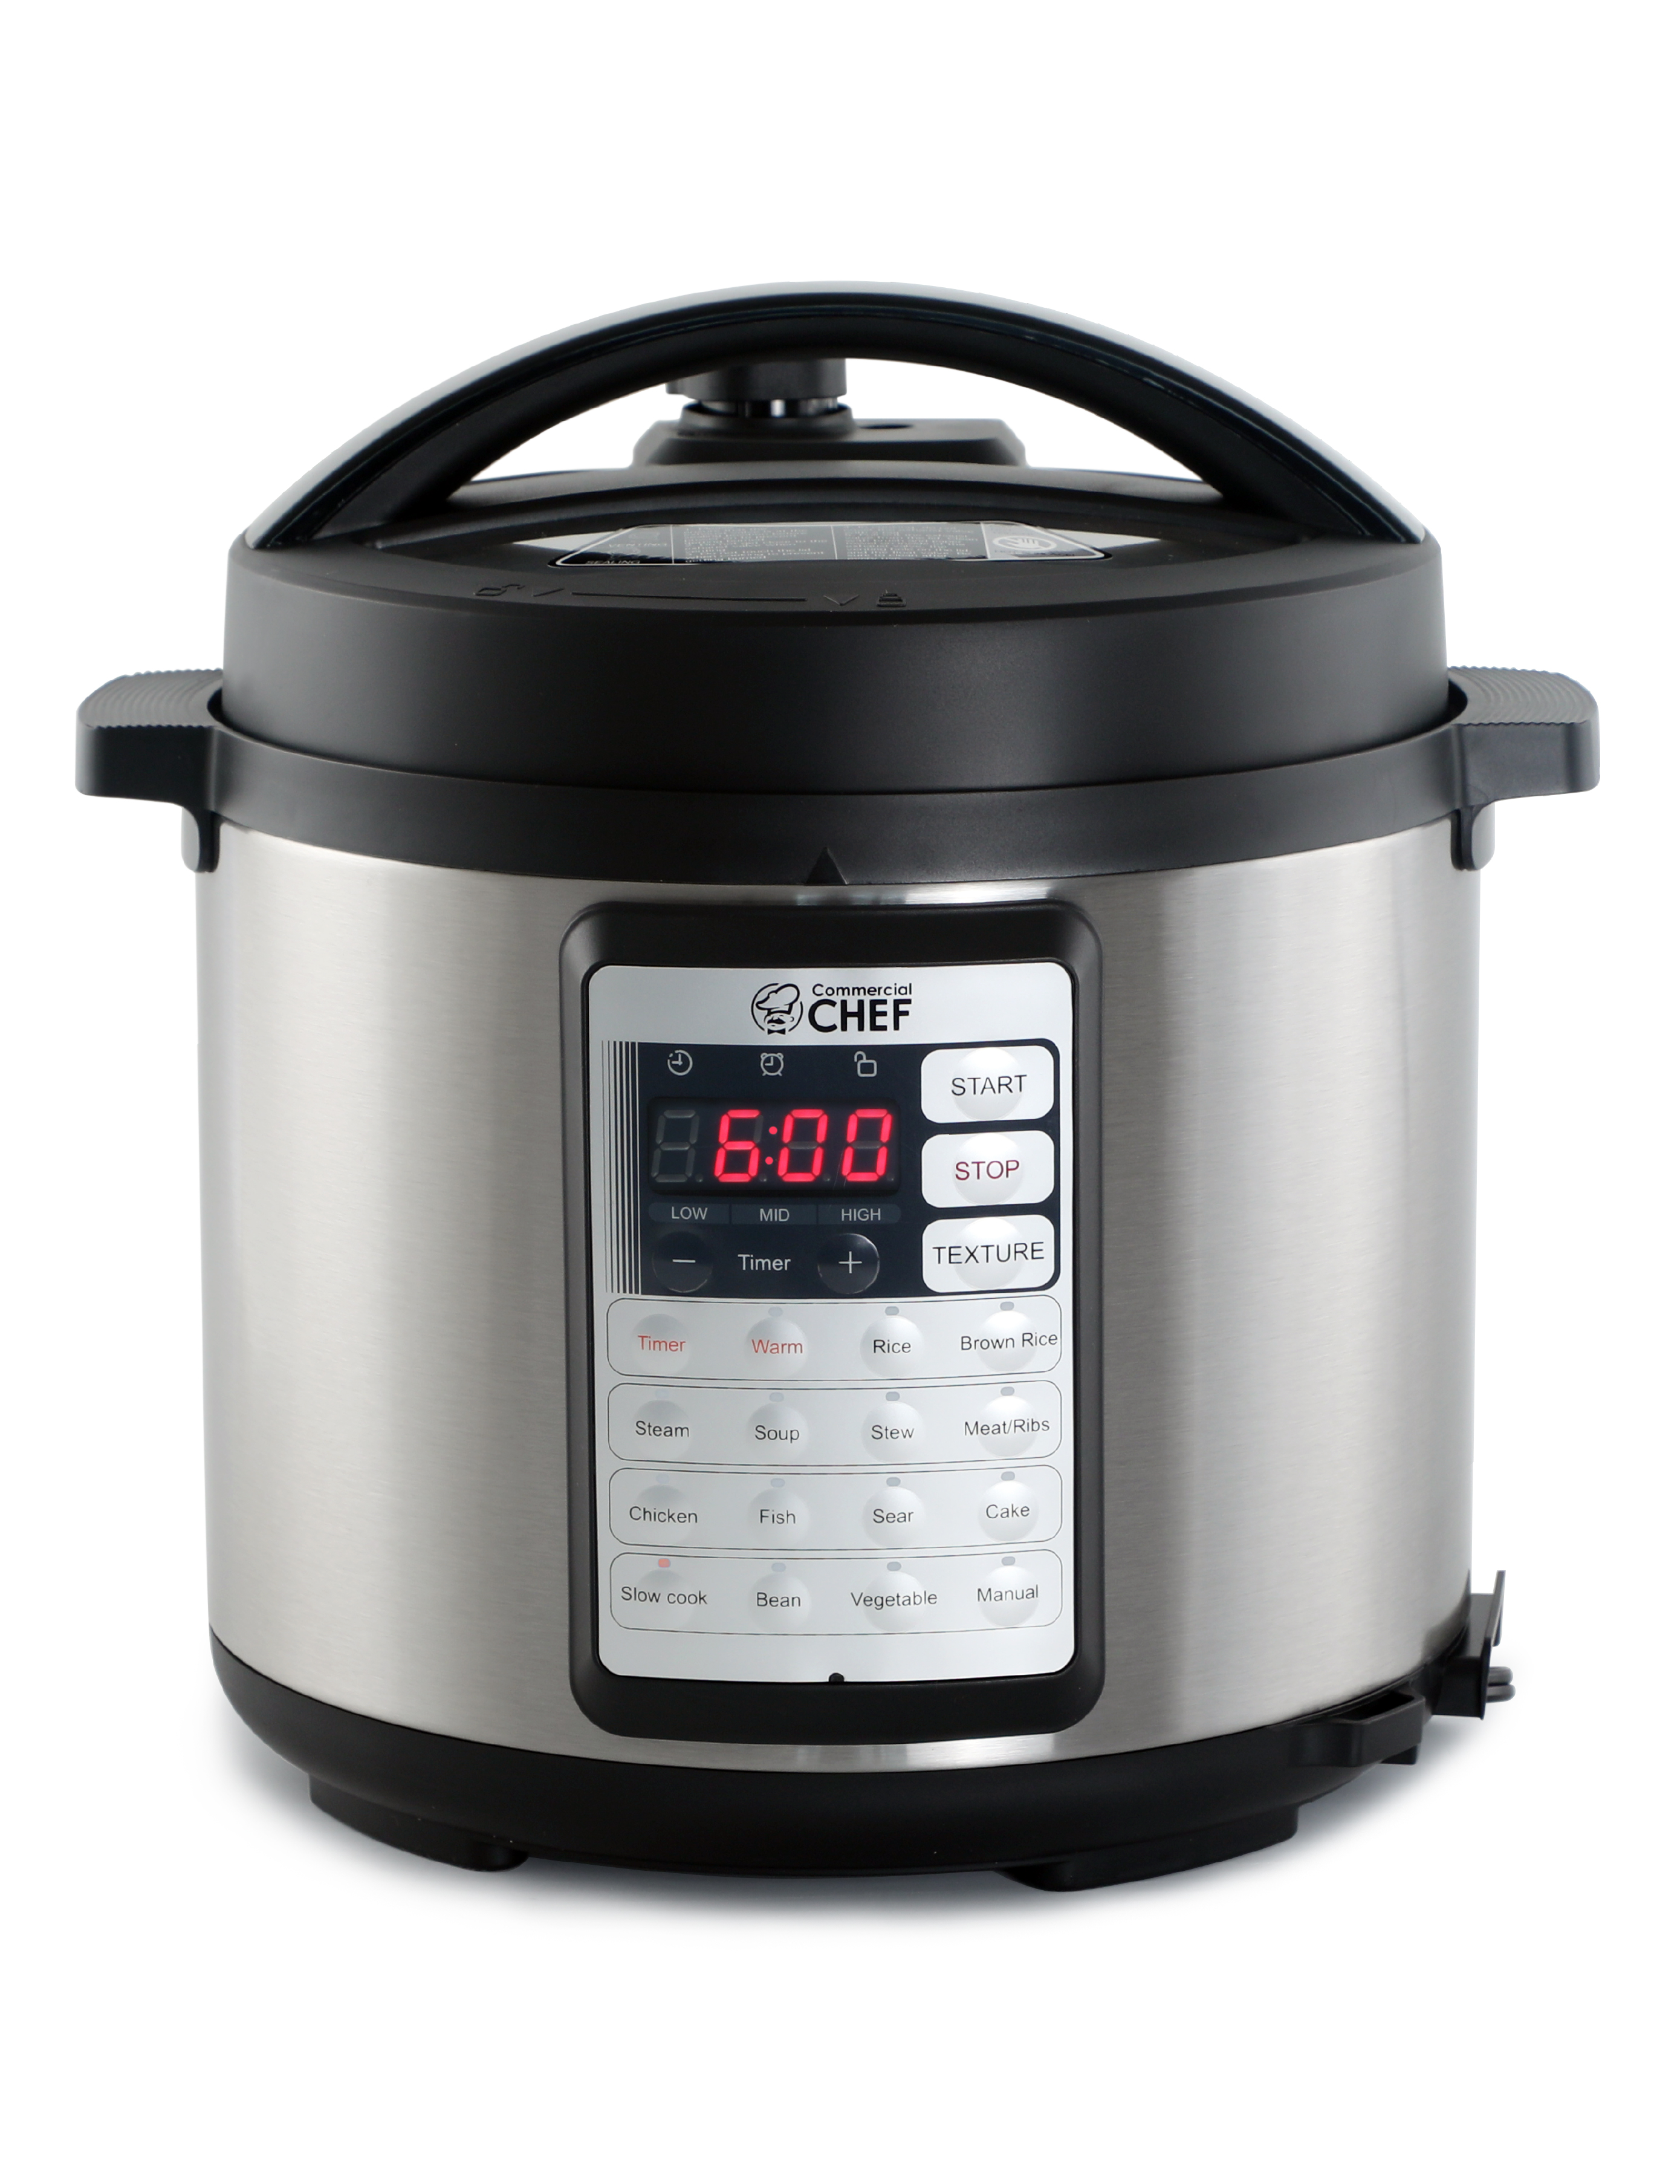 Commercial Chef 6.3-Quart 13-in-1 Electric Pressure Cooker, Stainless Steel - image 1 of 6